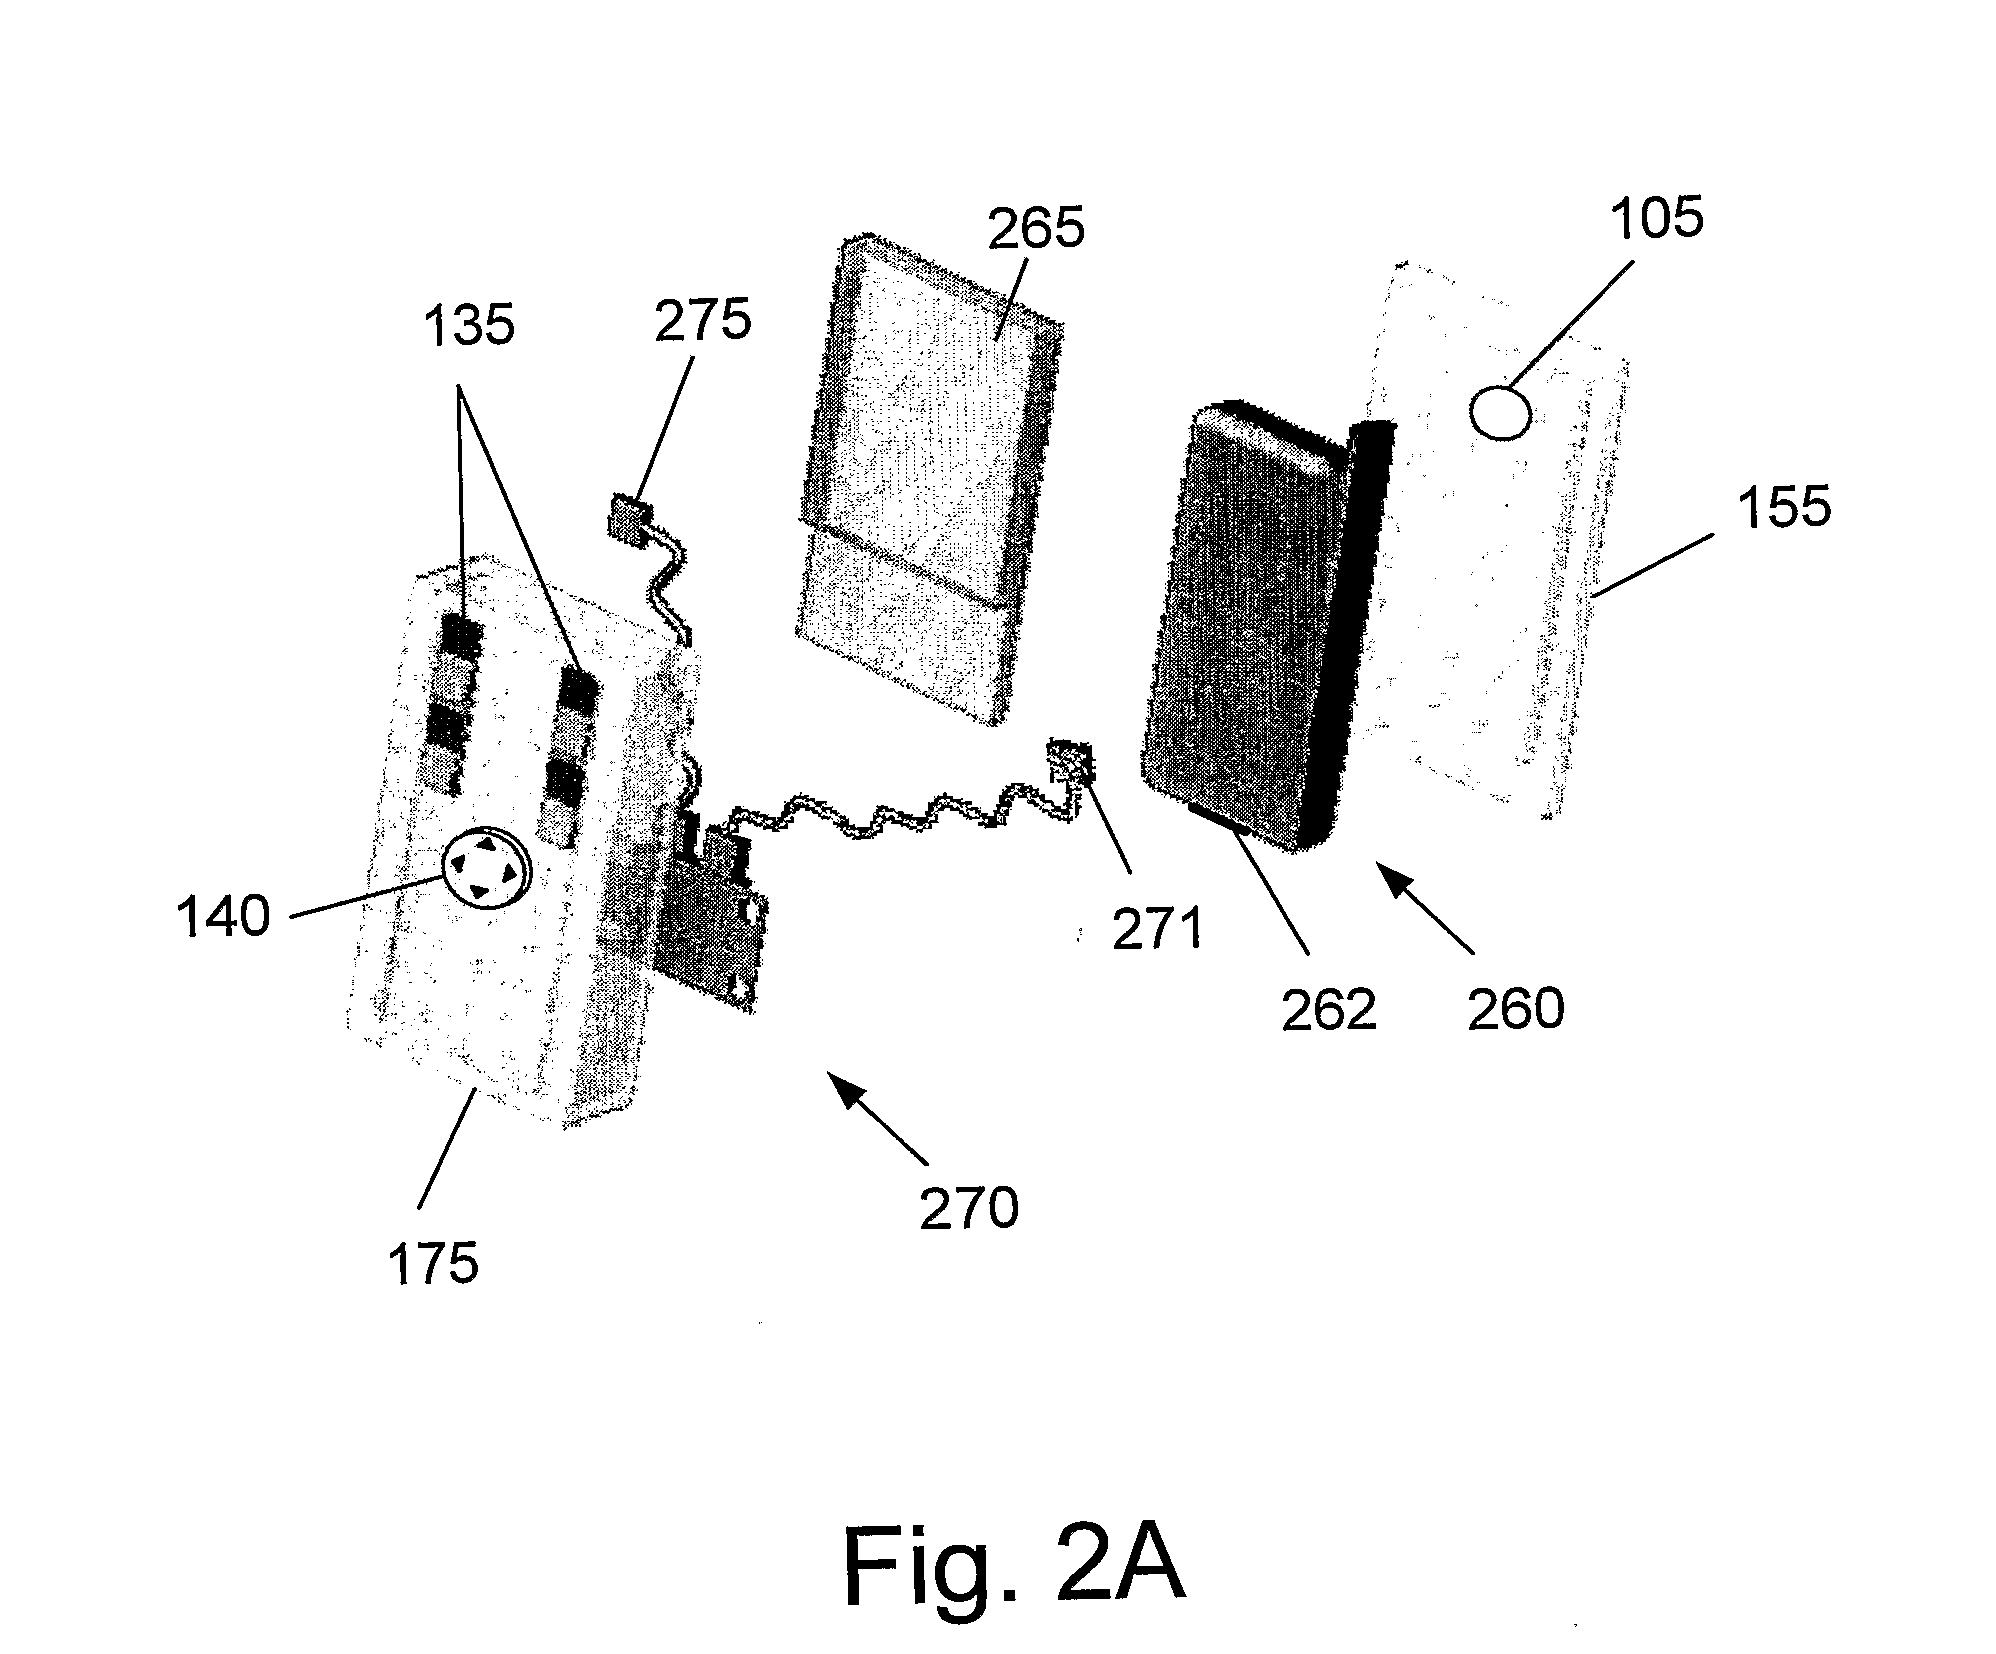 Method and system for using a cellular phone in water activities